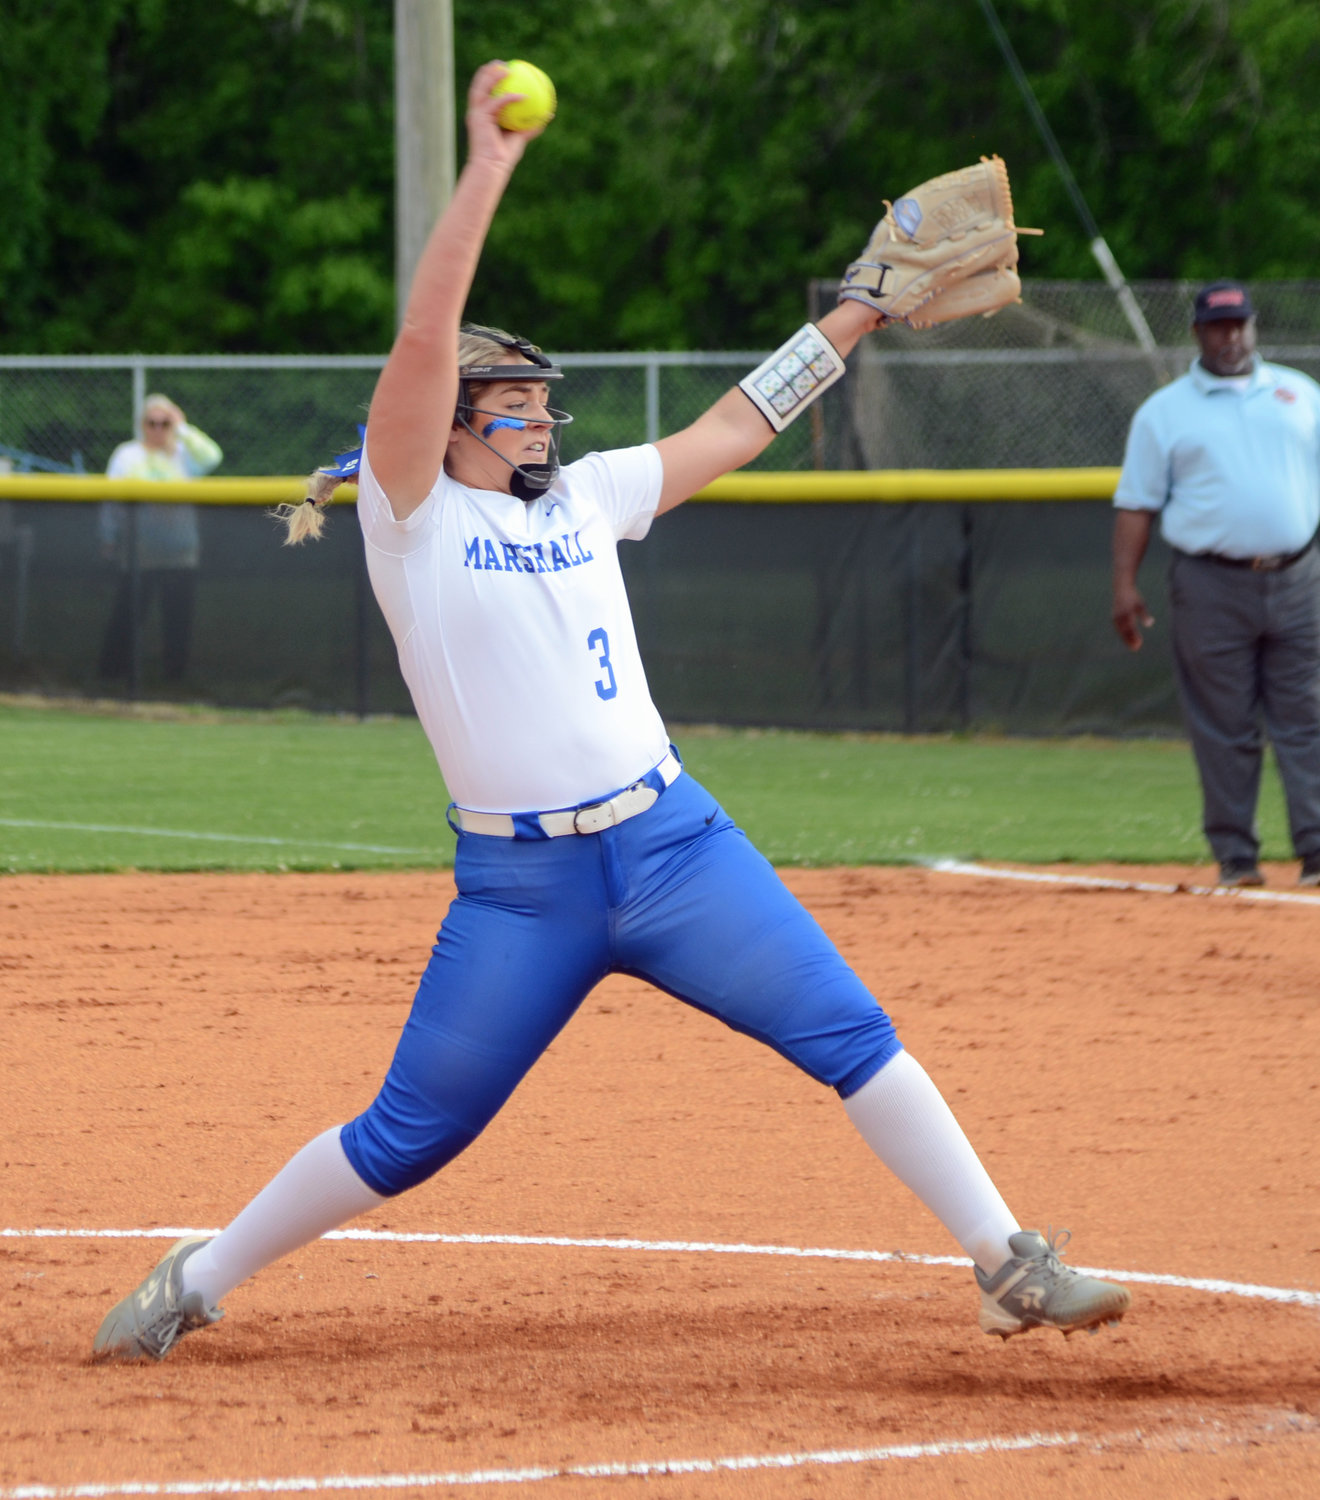 Taylor Pickle picked up the complete game win in the circle for the Tigerettes.